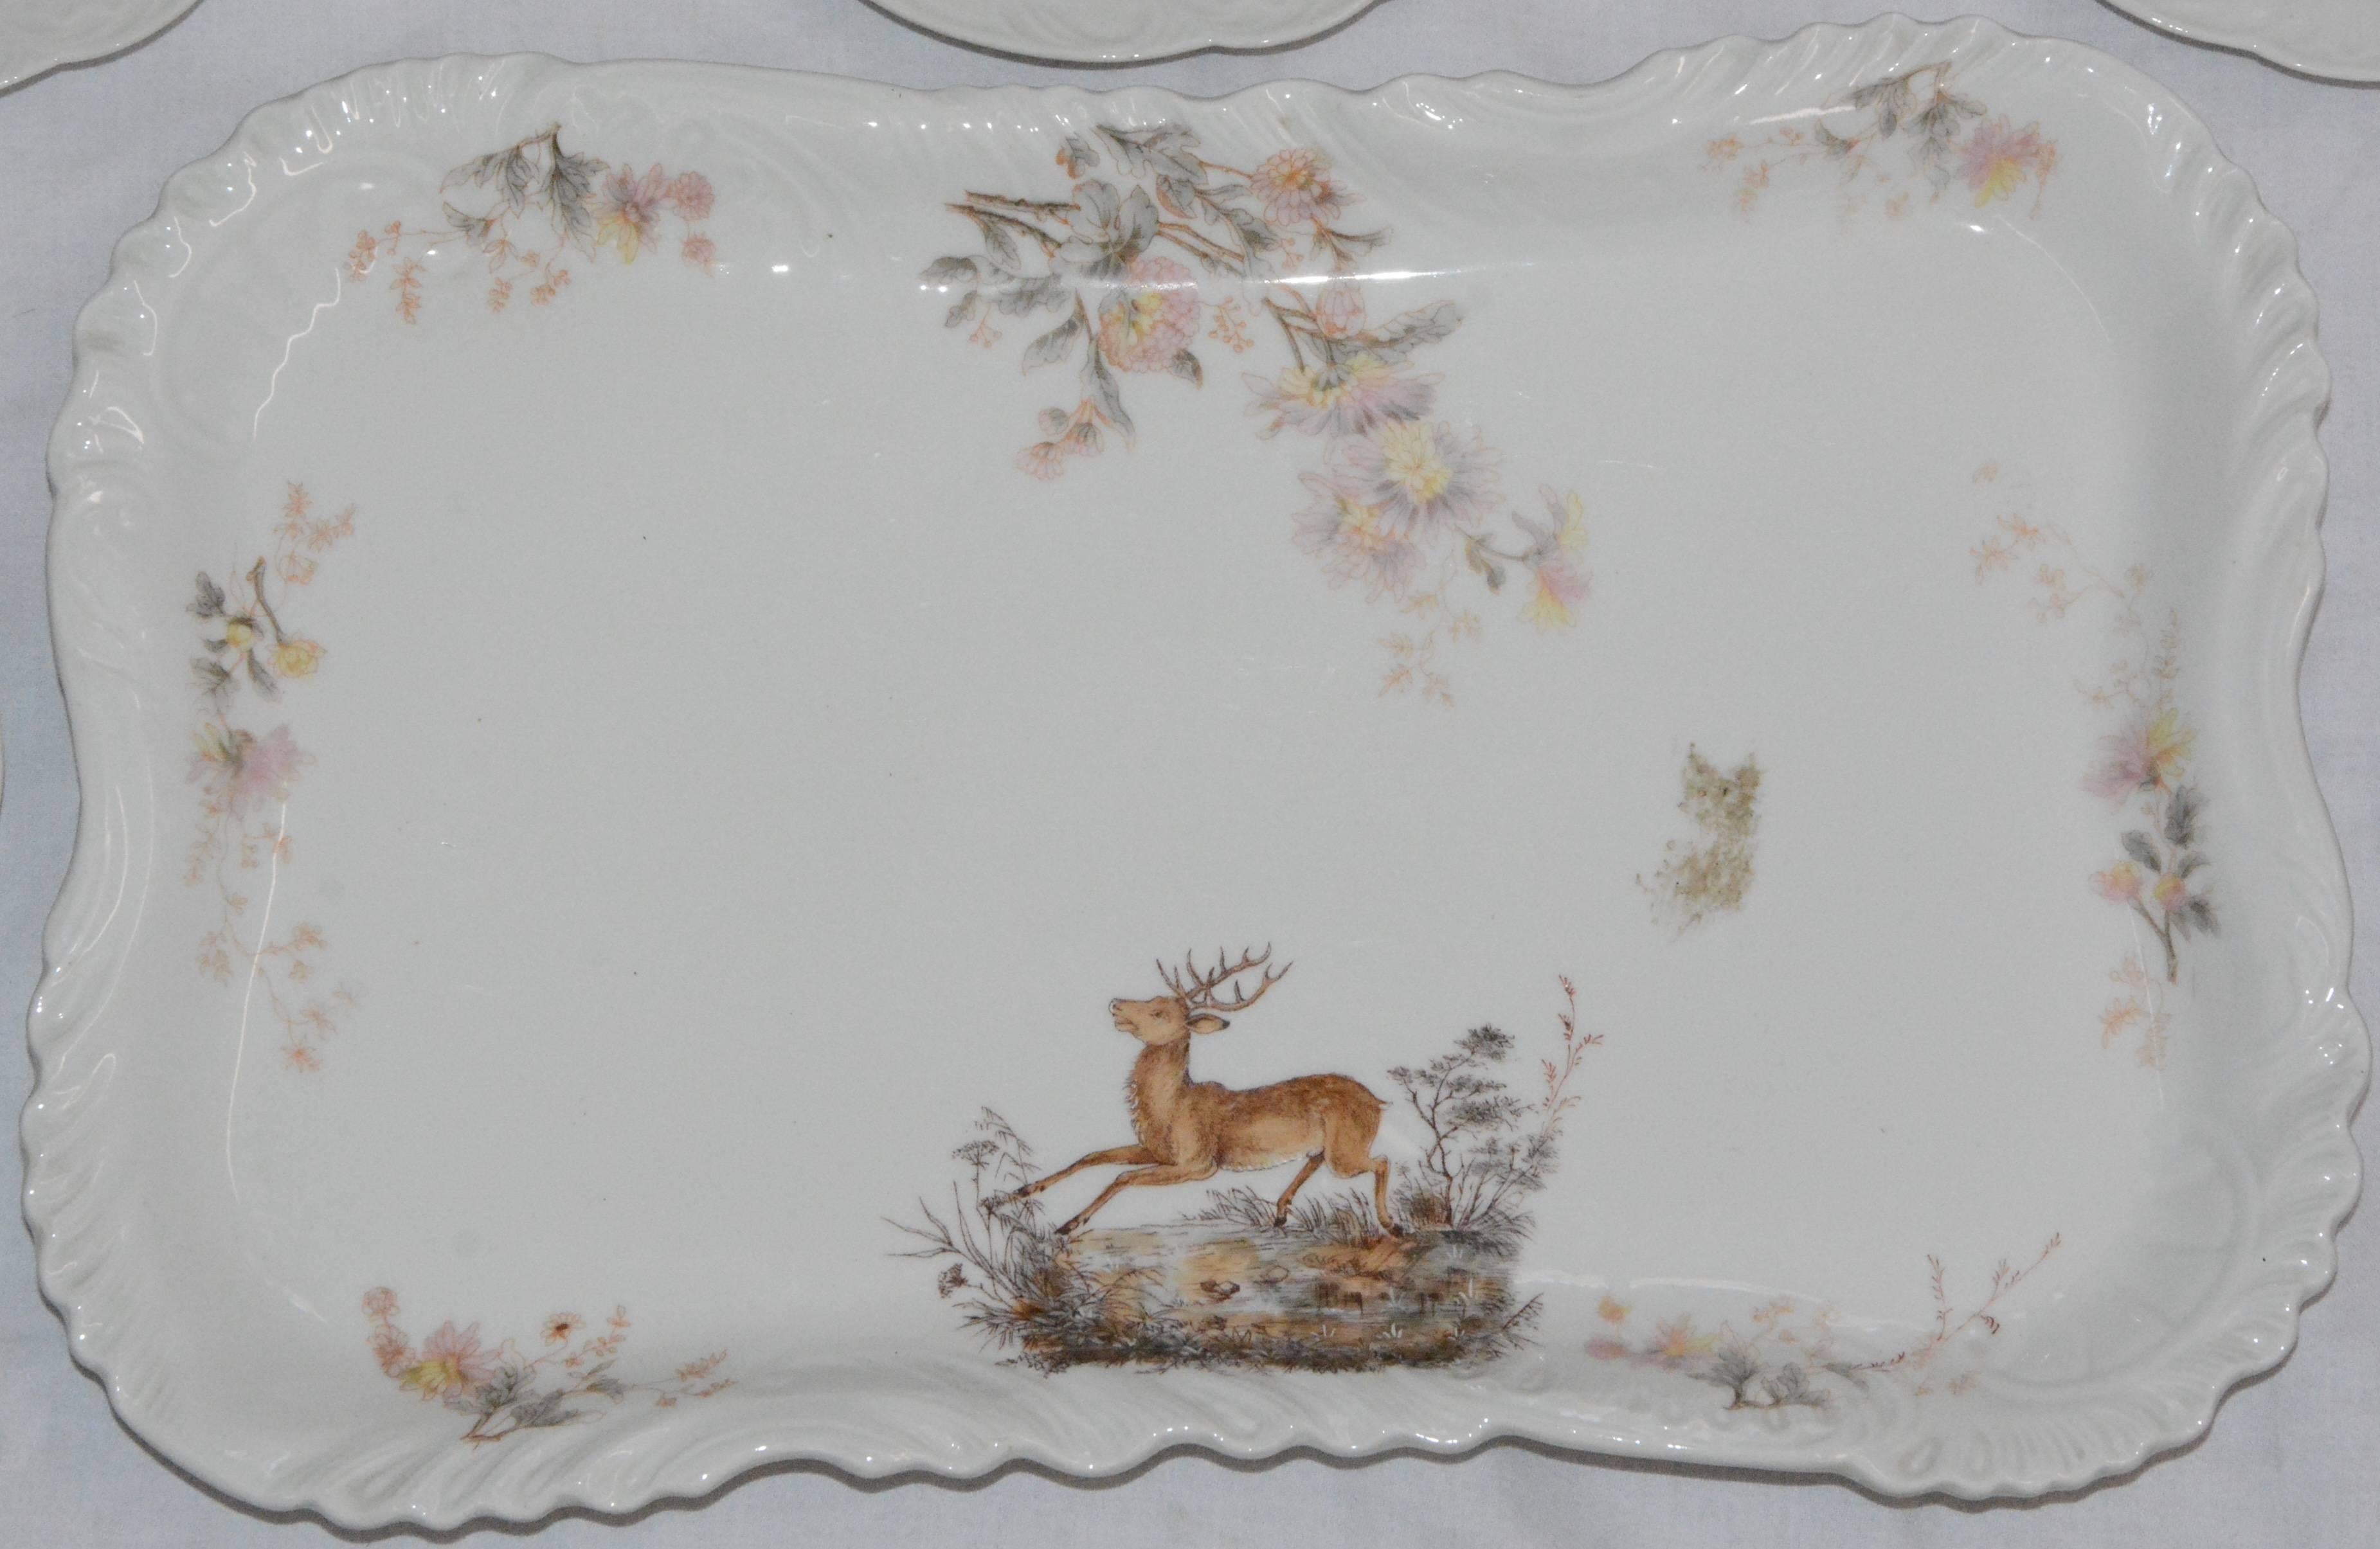 An array of frolicking animals is captured in the beauty of these plates and matching platter by Carlsbad of Austria. All the pieces of porcelain have a lovely embossed design. The plates measure 8.75 inches wide. The plates are marked but the